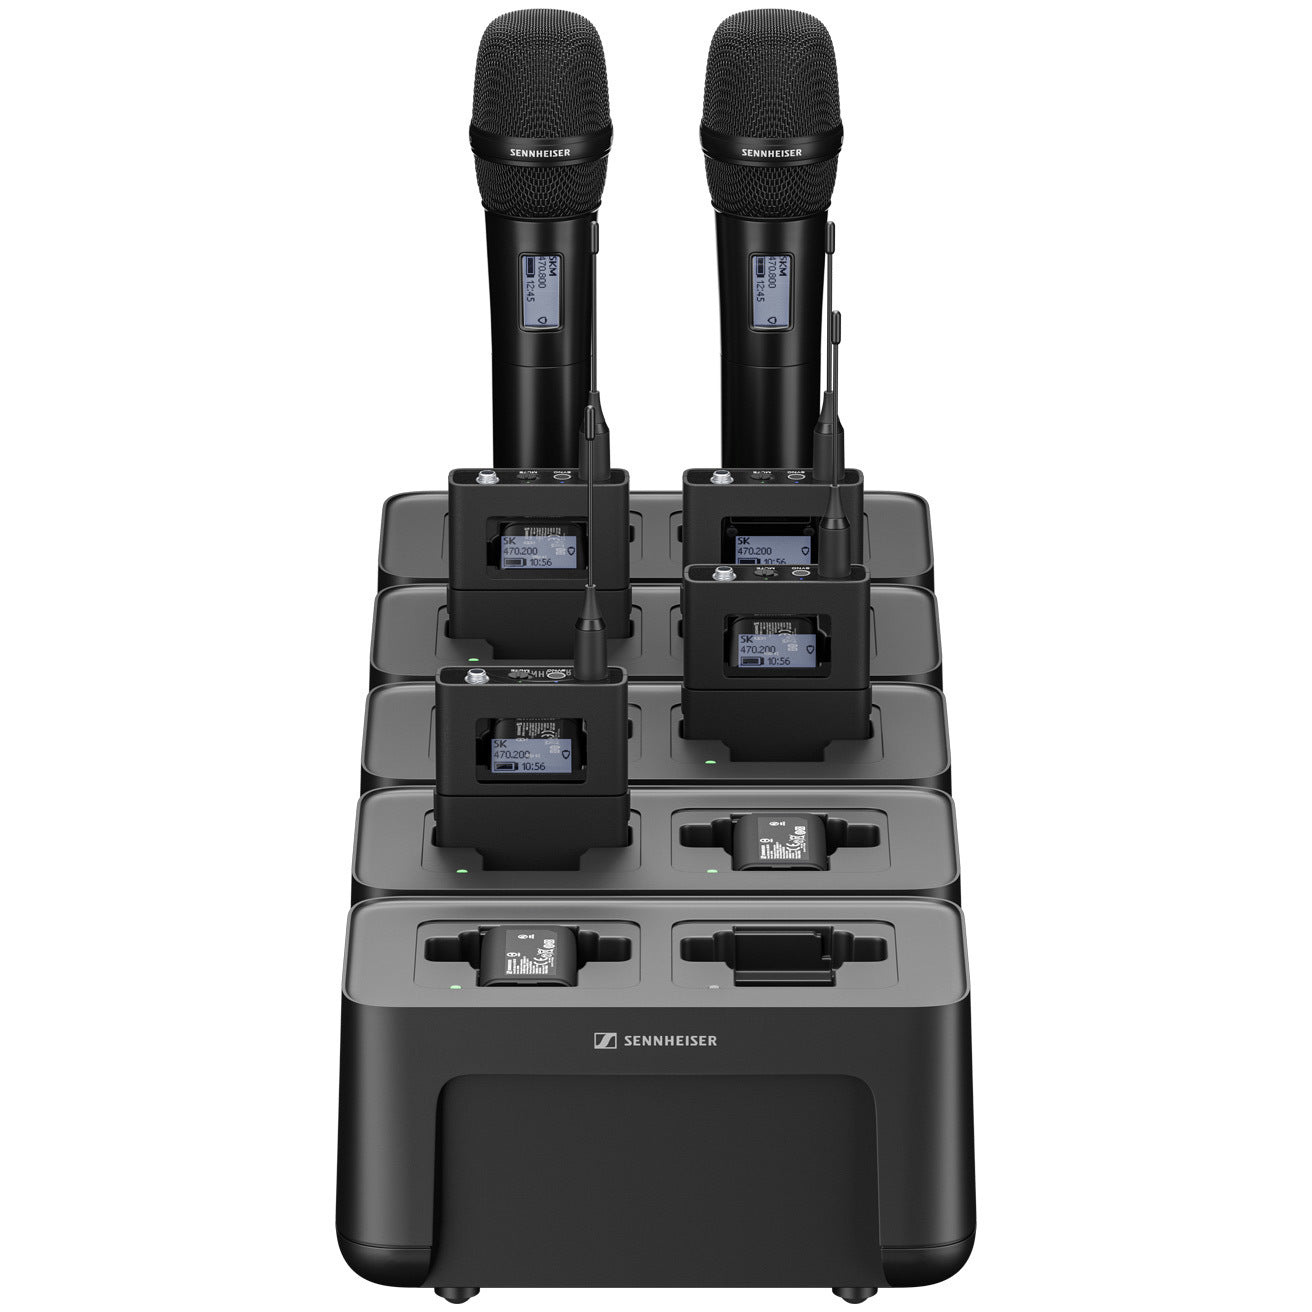 Sennheiser CHG 70N-C - Network Enabled Charger, shown with multiples